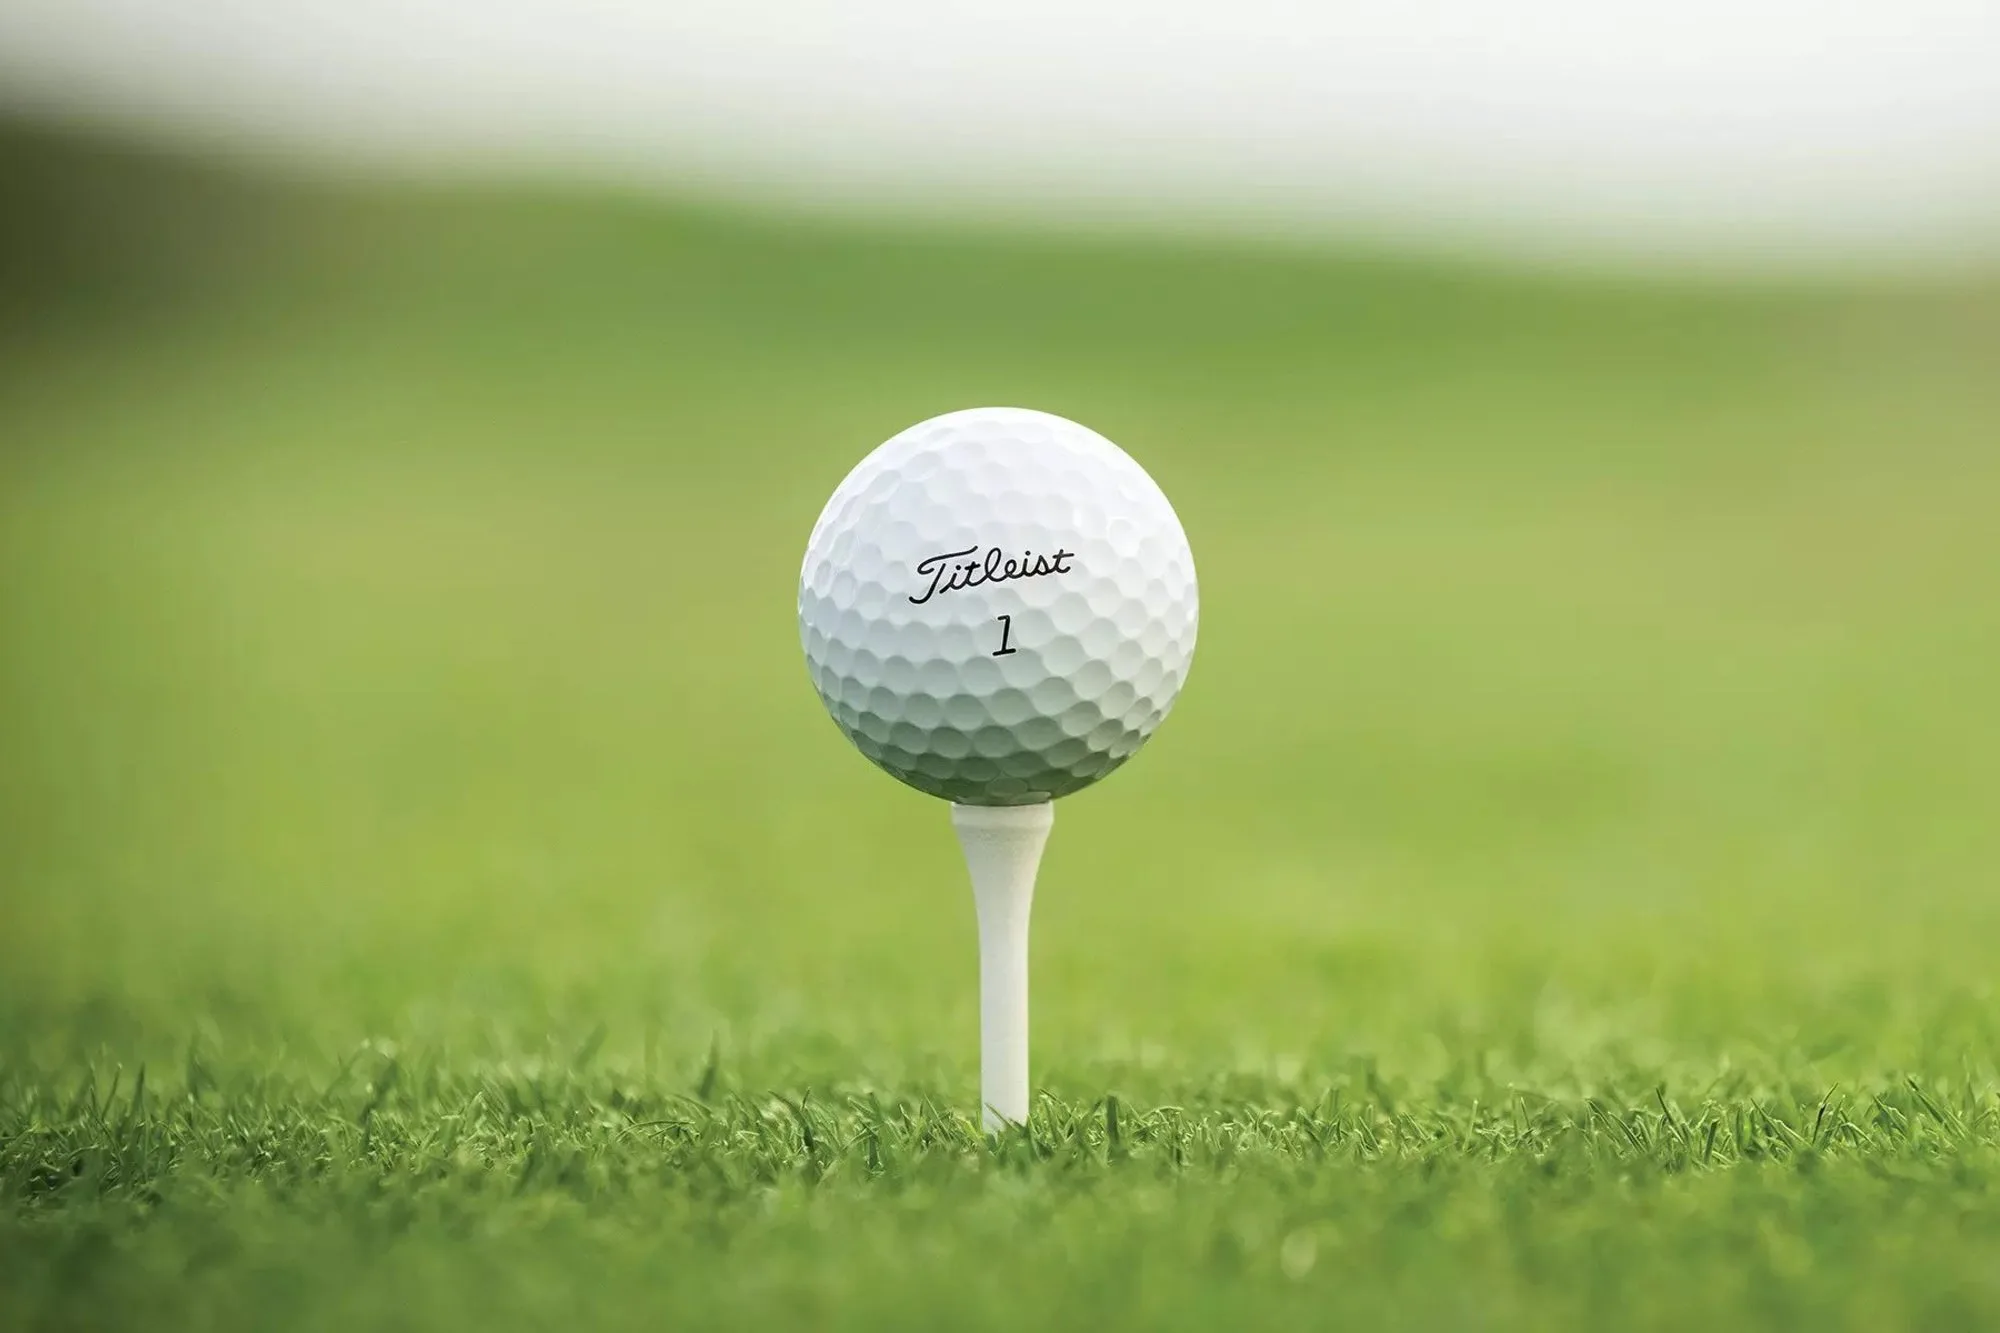 How long does a golf ball last? The answer may surprise you